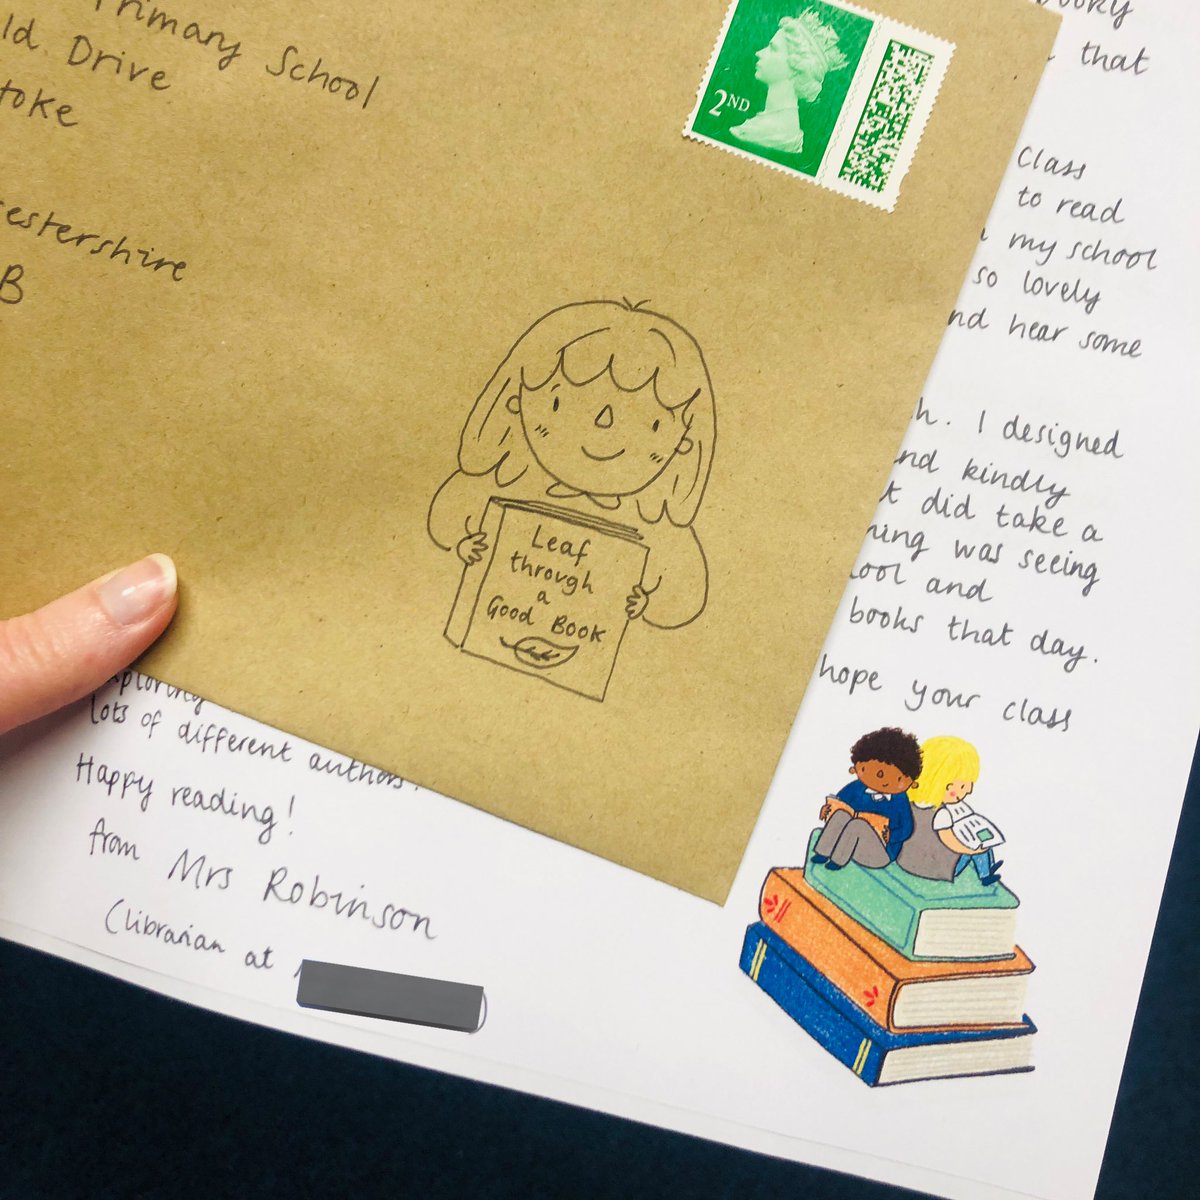 I had some wonderful letters from children from different schools thanking me for organising the #LeafLitFest last term so I’m posting some letters back! Trying to keep the art of letter writing alive! 🙌💌📮 @WheatfieldPri @StapleHillPS